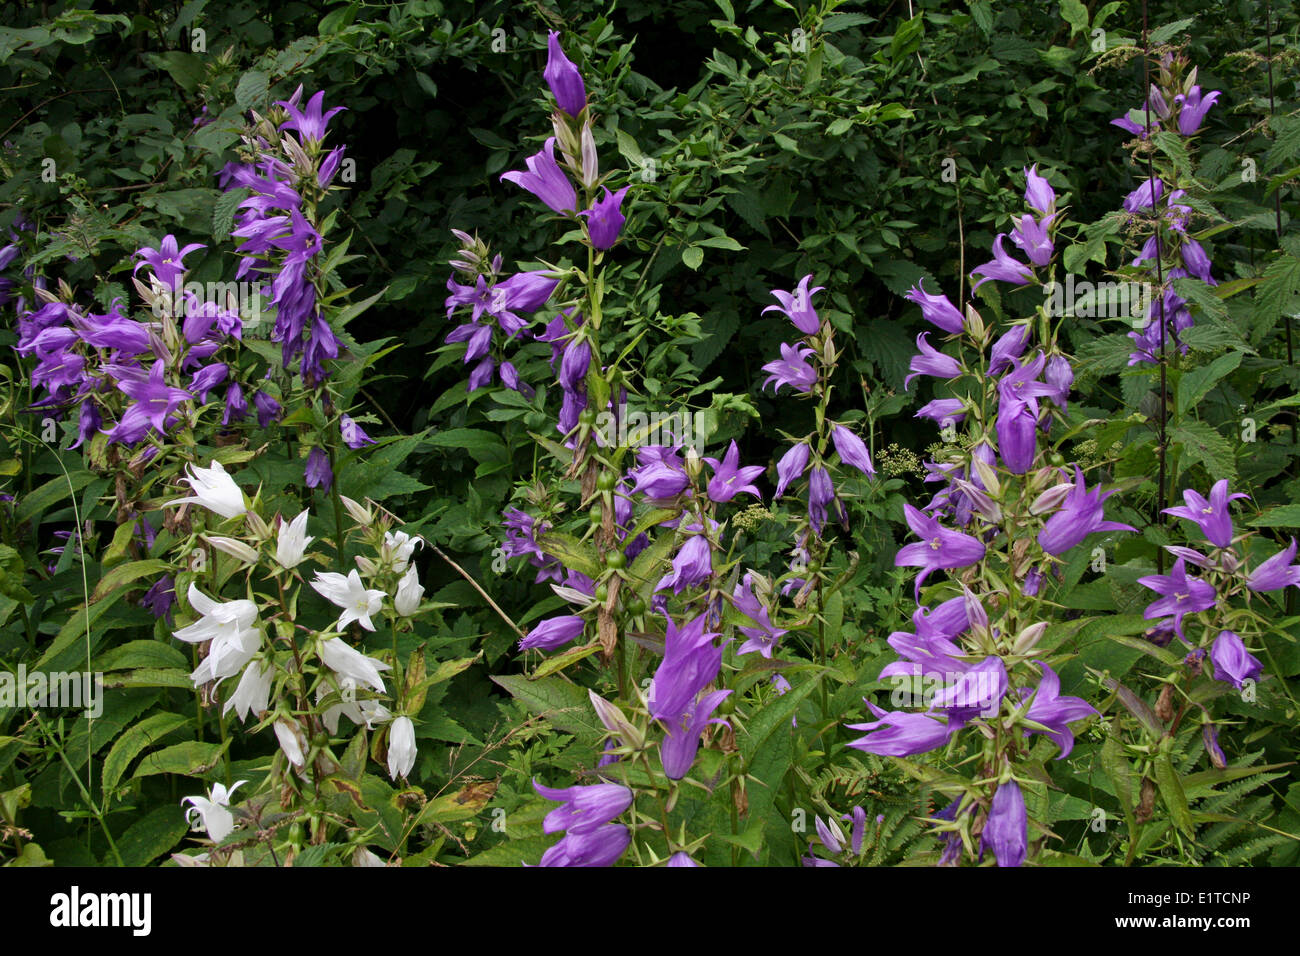 overview violet and white flowering specimens of Giant Bellflowers Stock Photo